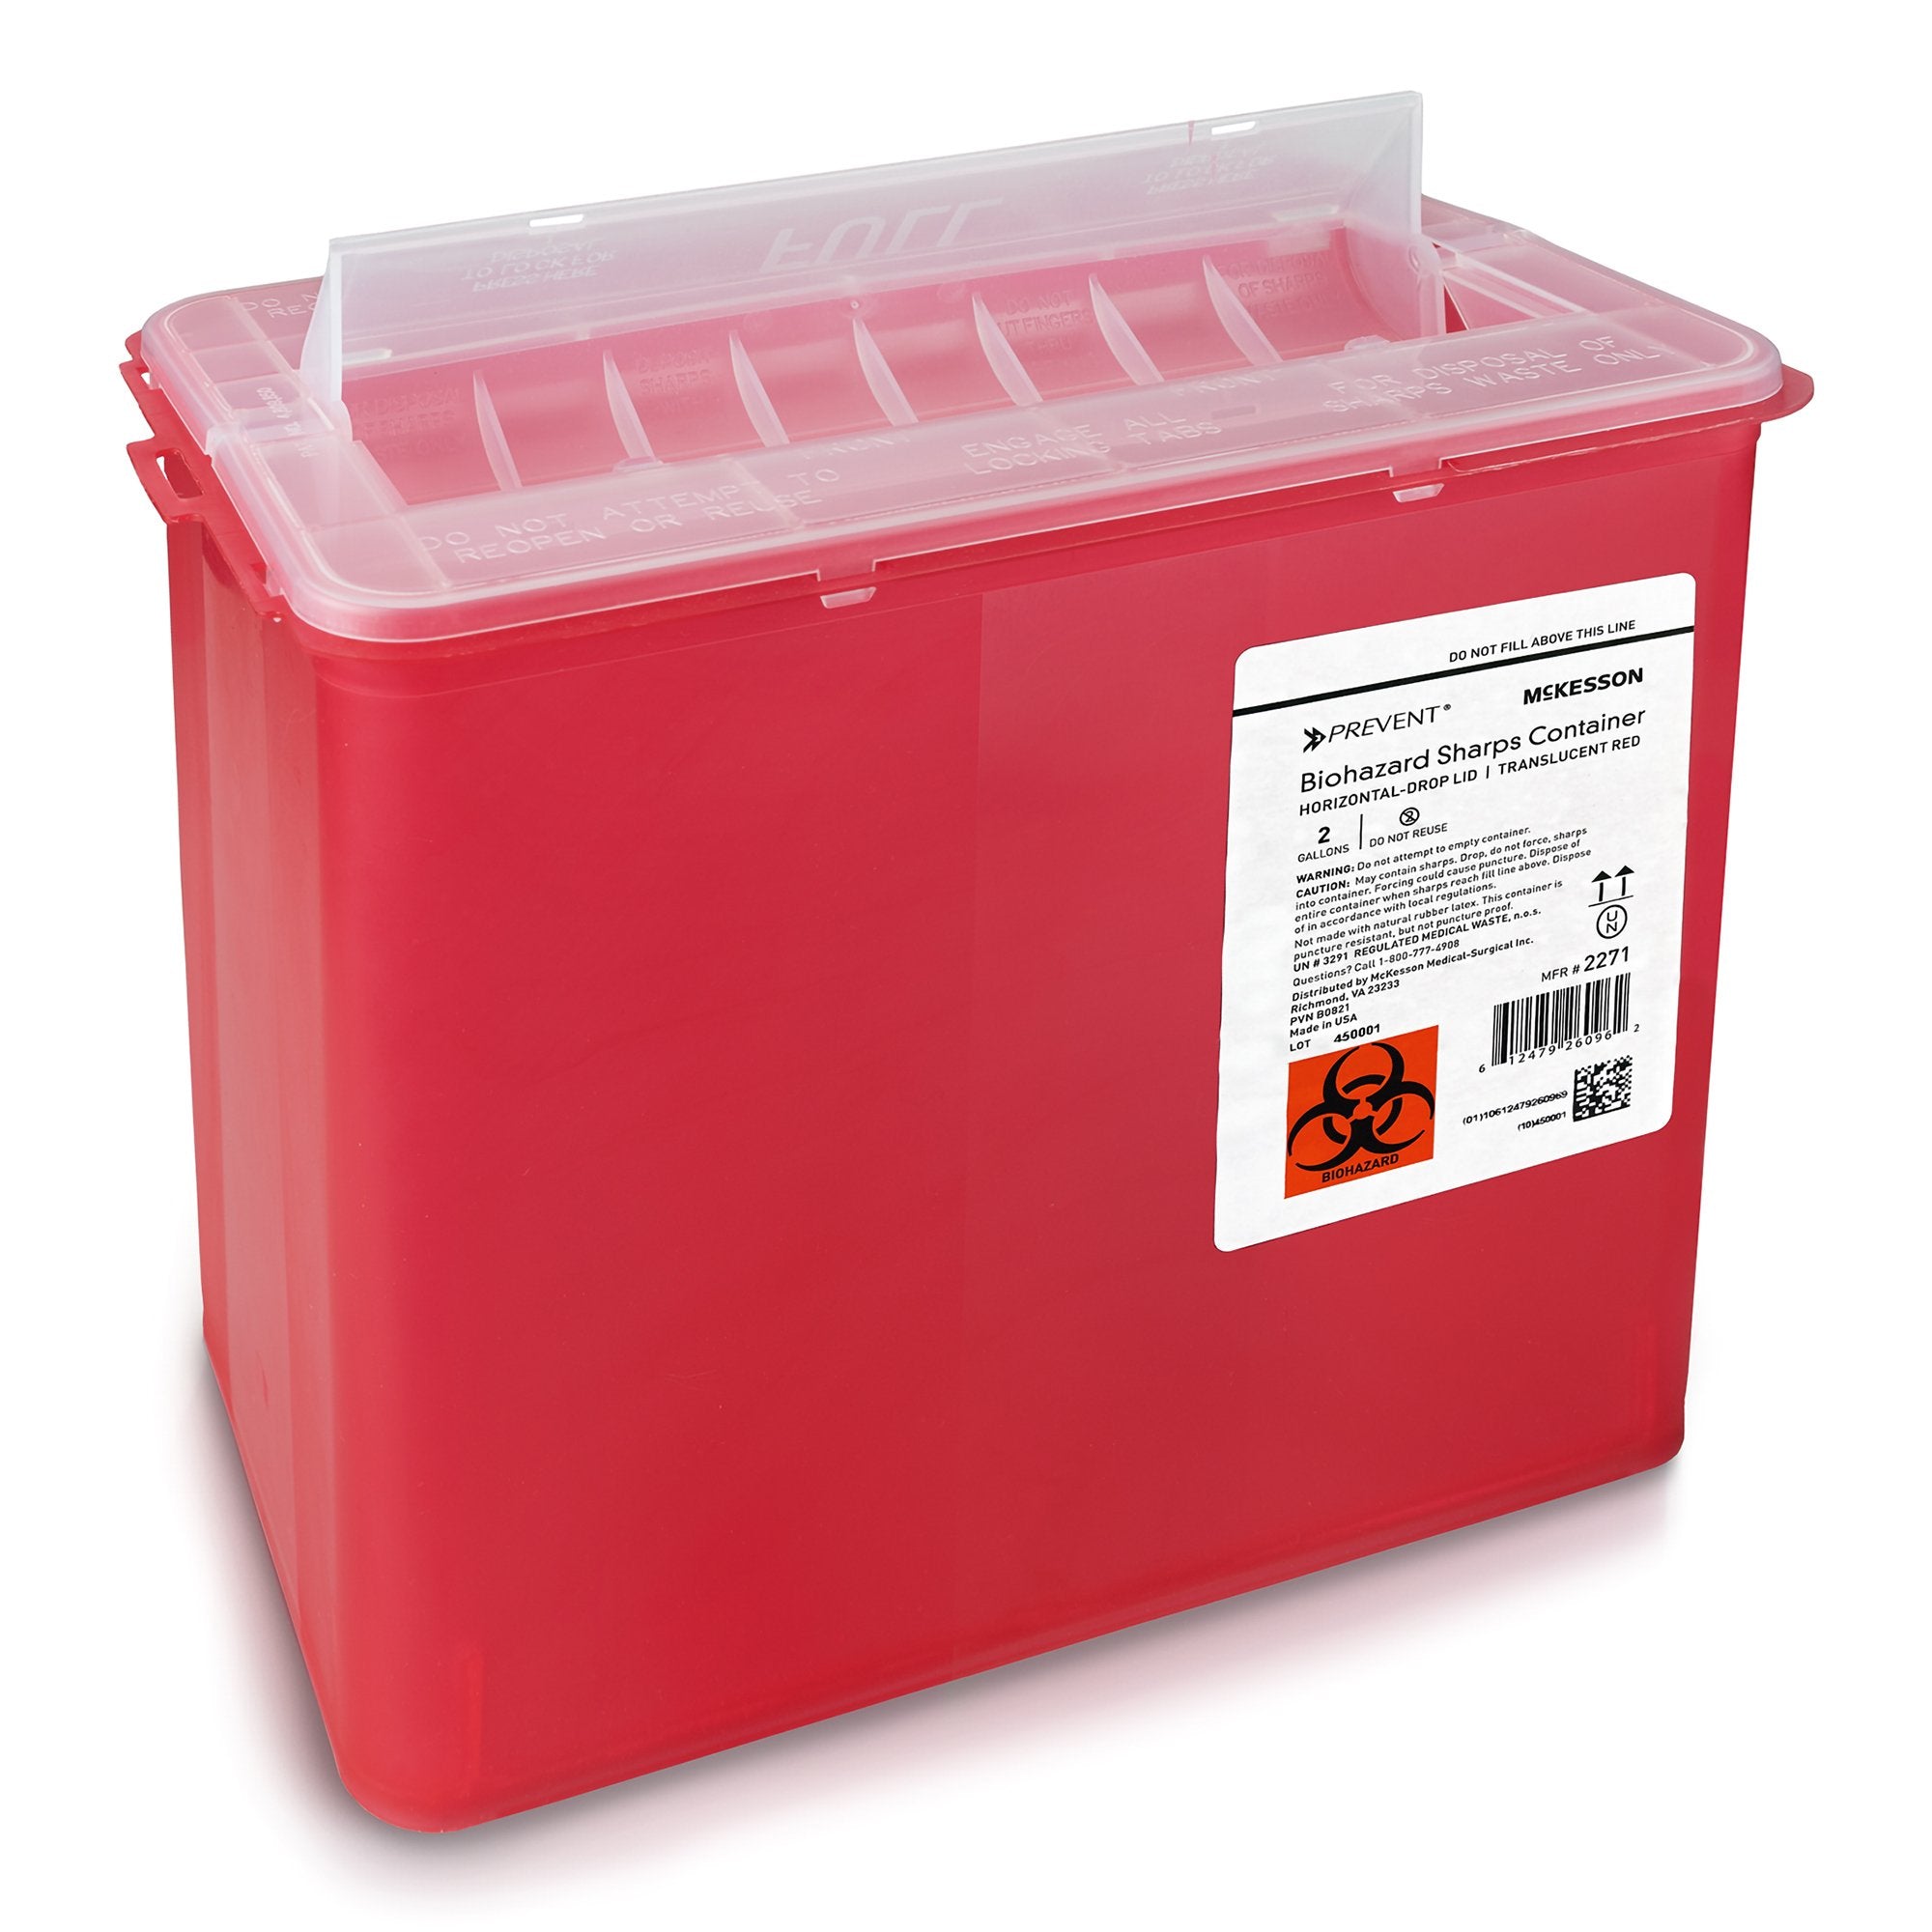 Sharps Container McKesson Prevent® Translucent Red Base 9-1/4 H X 10 W X 6 D Inch Horizontal Entry 2 Gallon